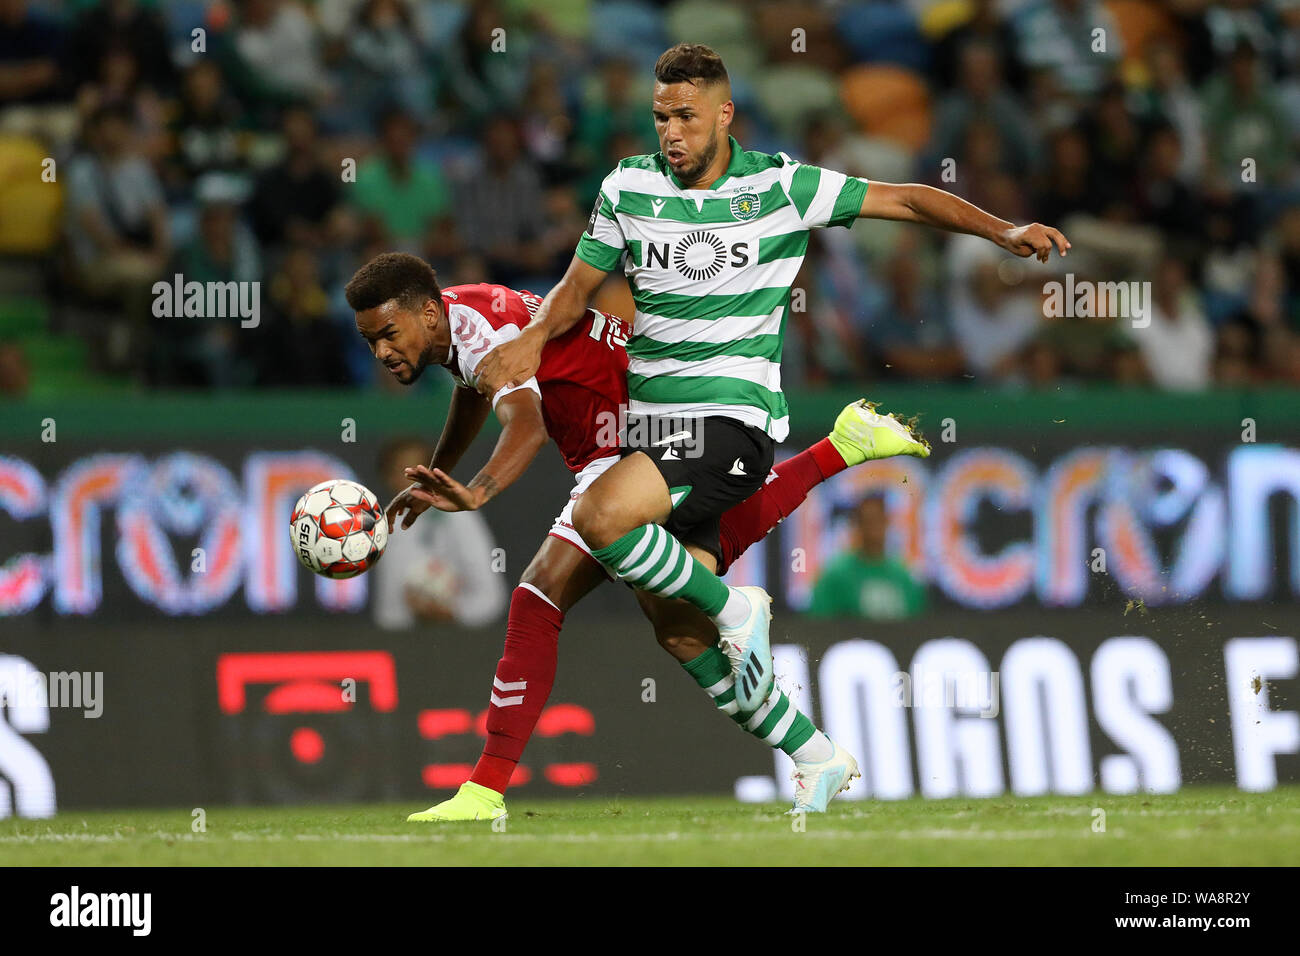 Bruno Viana of SC Braga (L) and Luiz Phellype of Sporting CP(R) are seen in  action during the League NOS 2019/20 football match between Sporting CP and SC  Braga in Lisbon.(Final score;